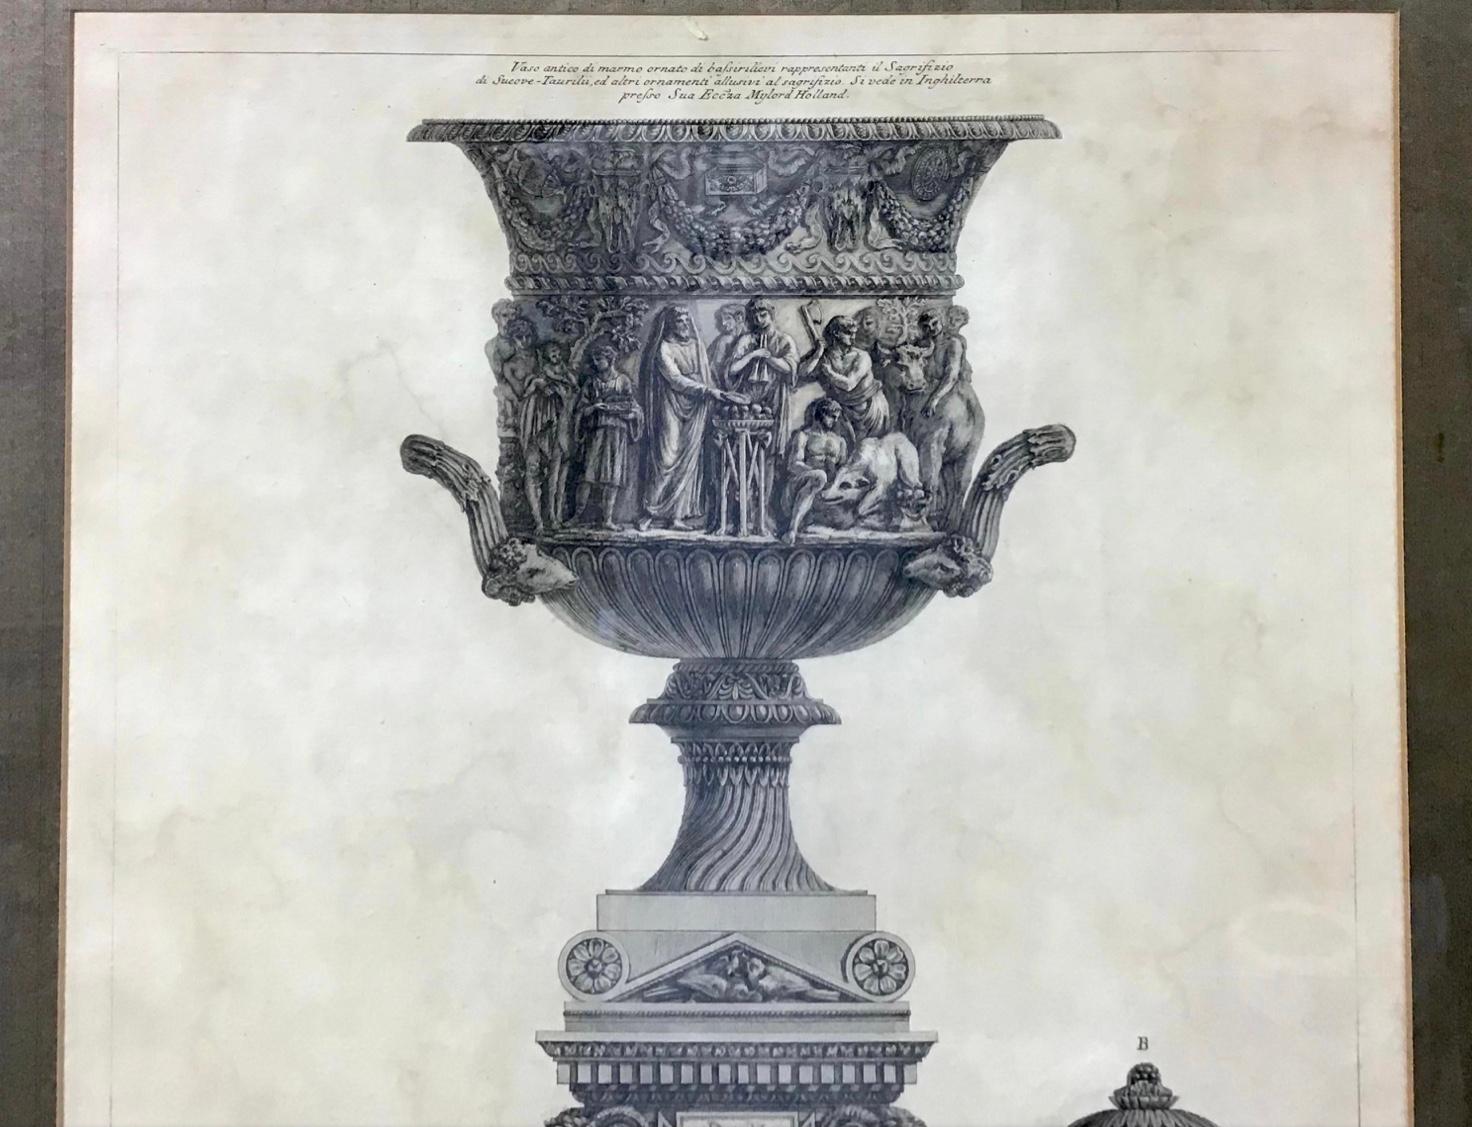 The central vase is carved with a priest and worshippers sacrificing the suovetaurilia (a boar, a ram and a bull), and is placed on a sarcophagus guarded by winged sphinxes. The left vase is carved with two birds eating grapes or berries, and the